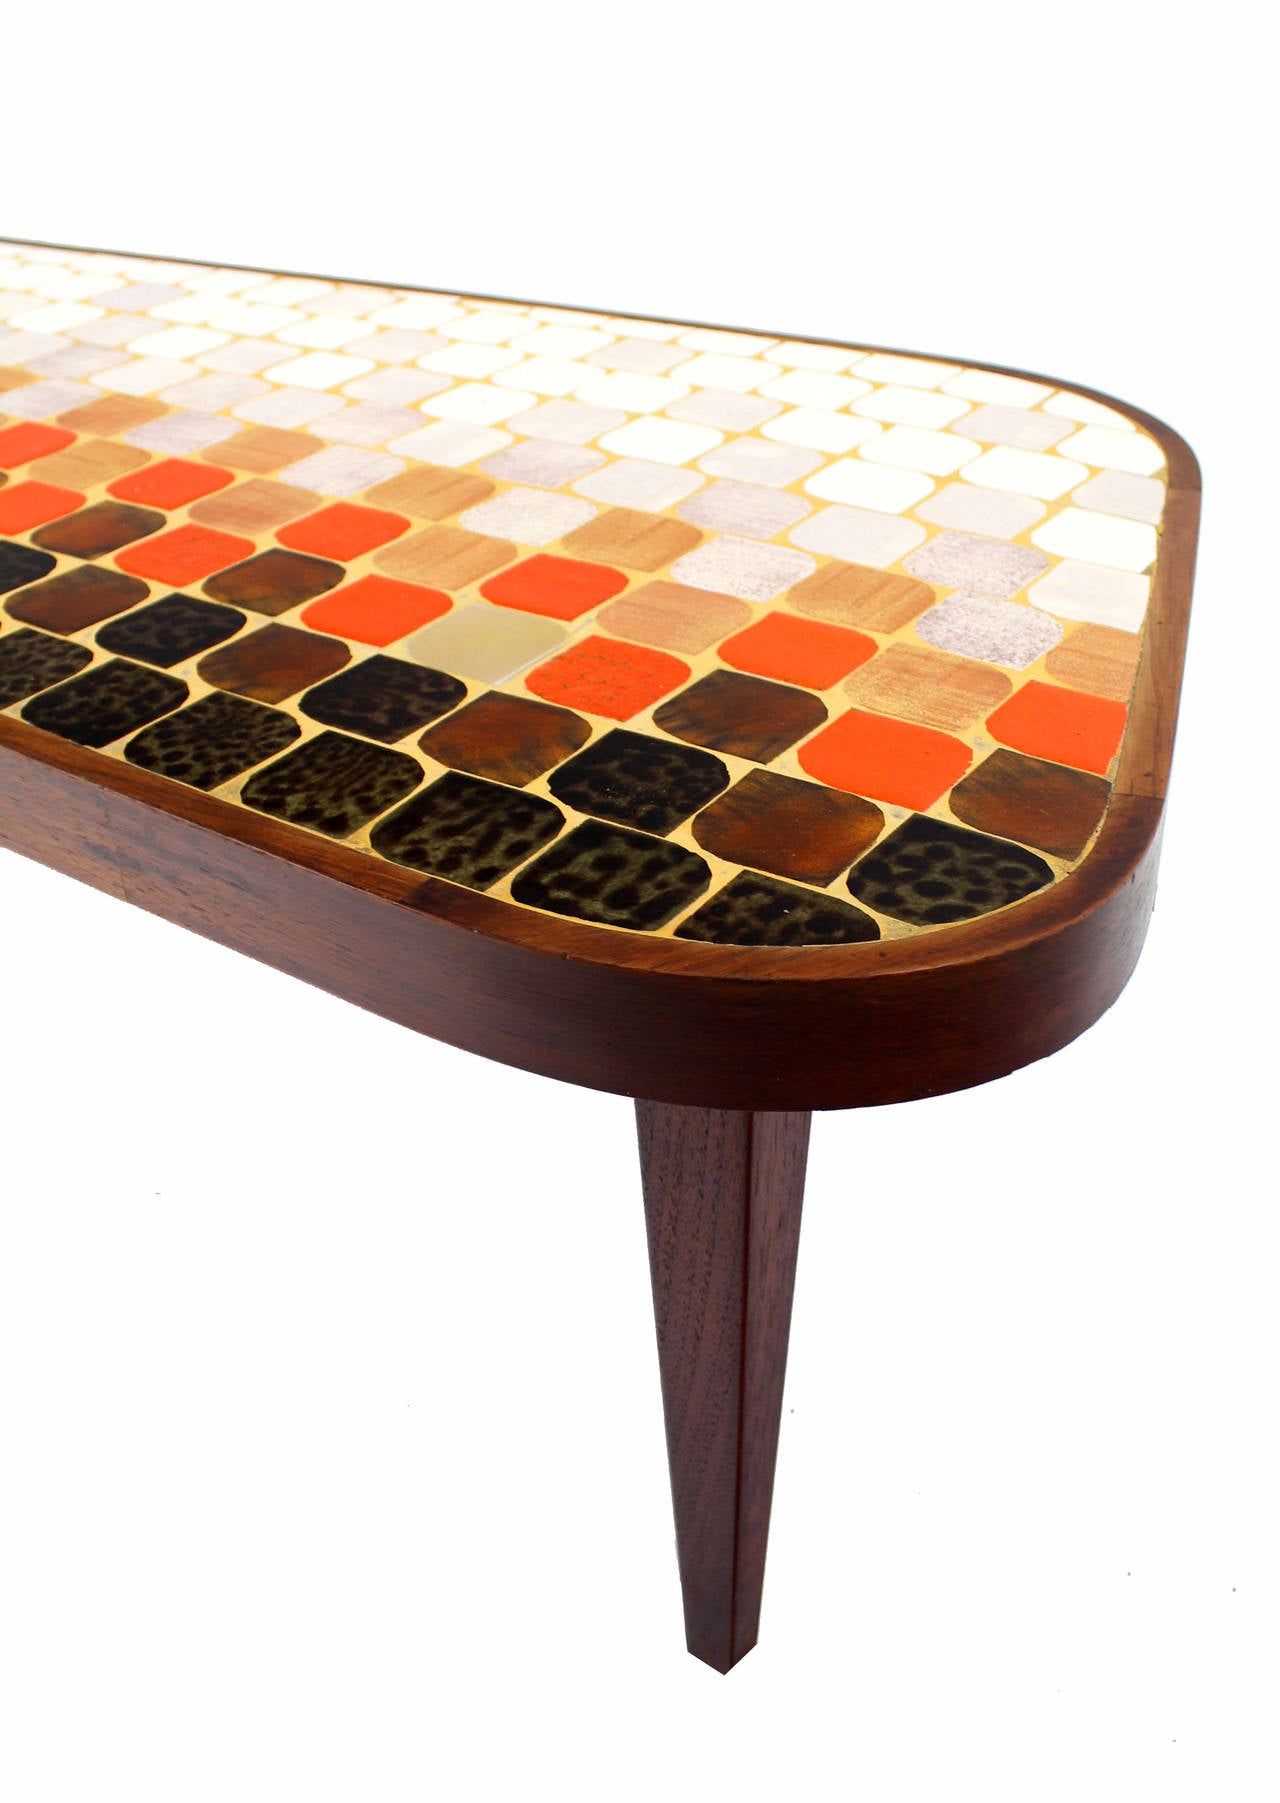 Mid-Century Modern Organic Shape Coffee Table with Tile Mosaic Top 1